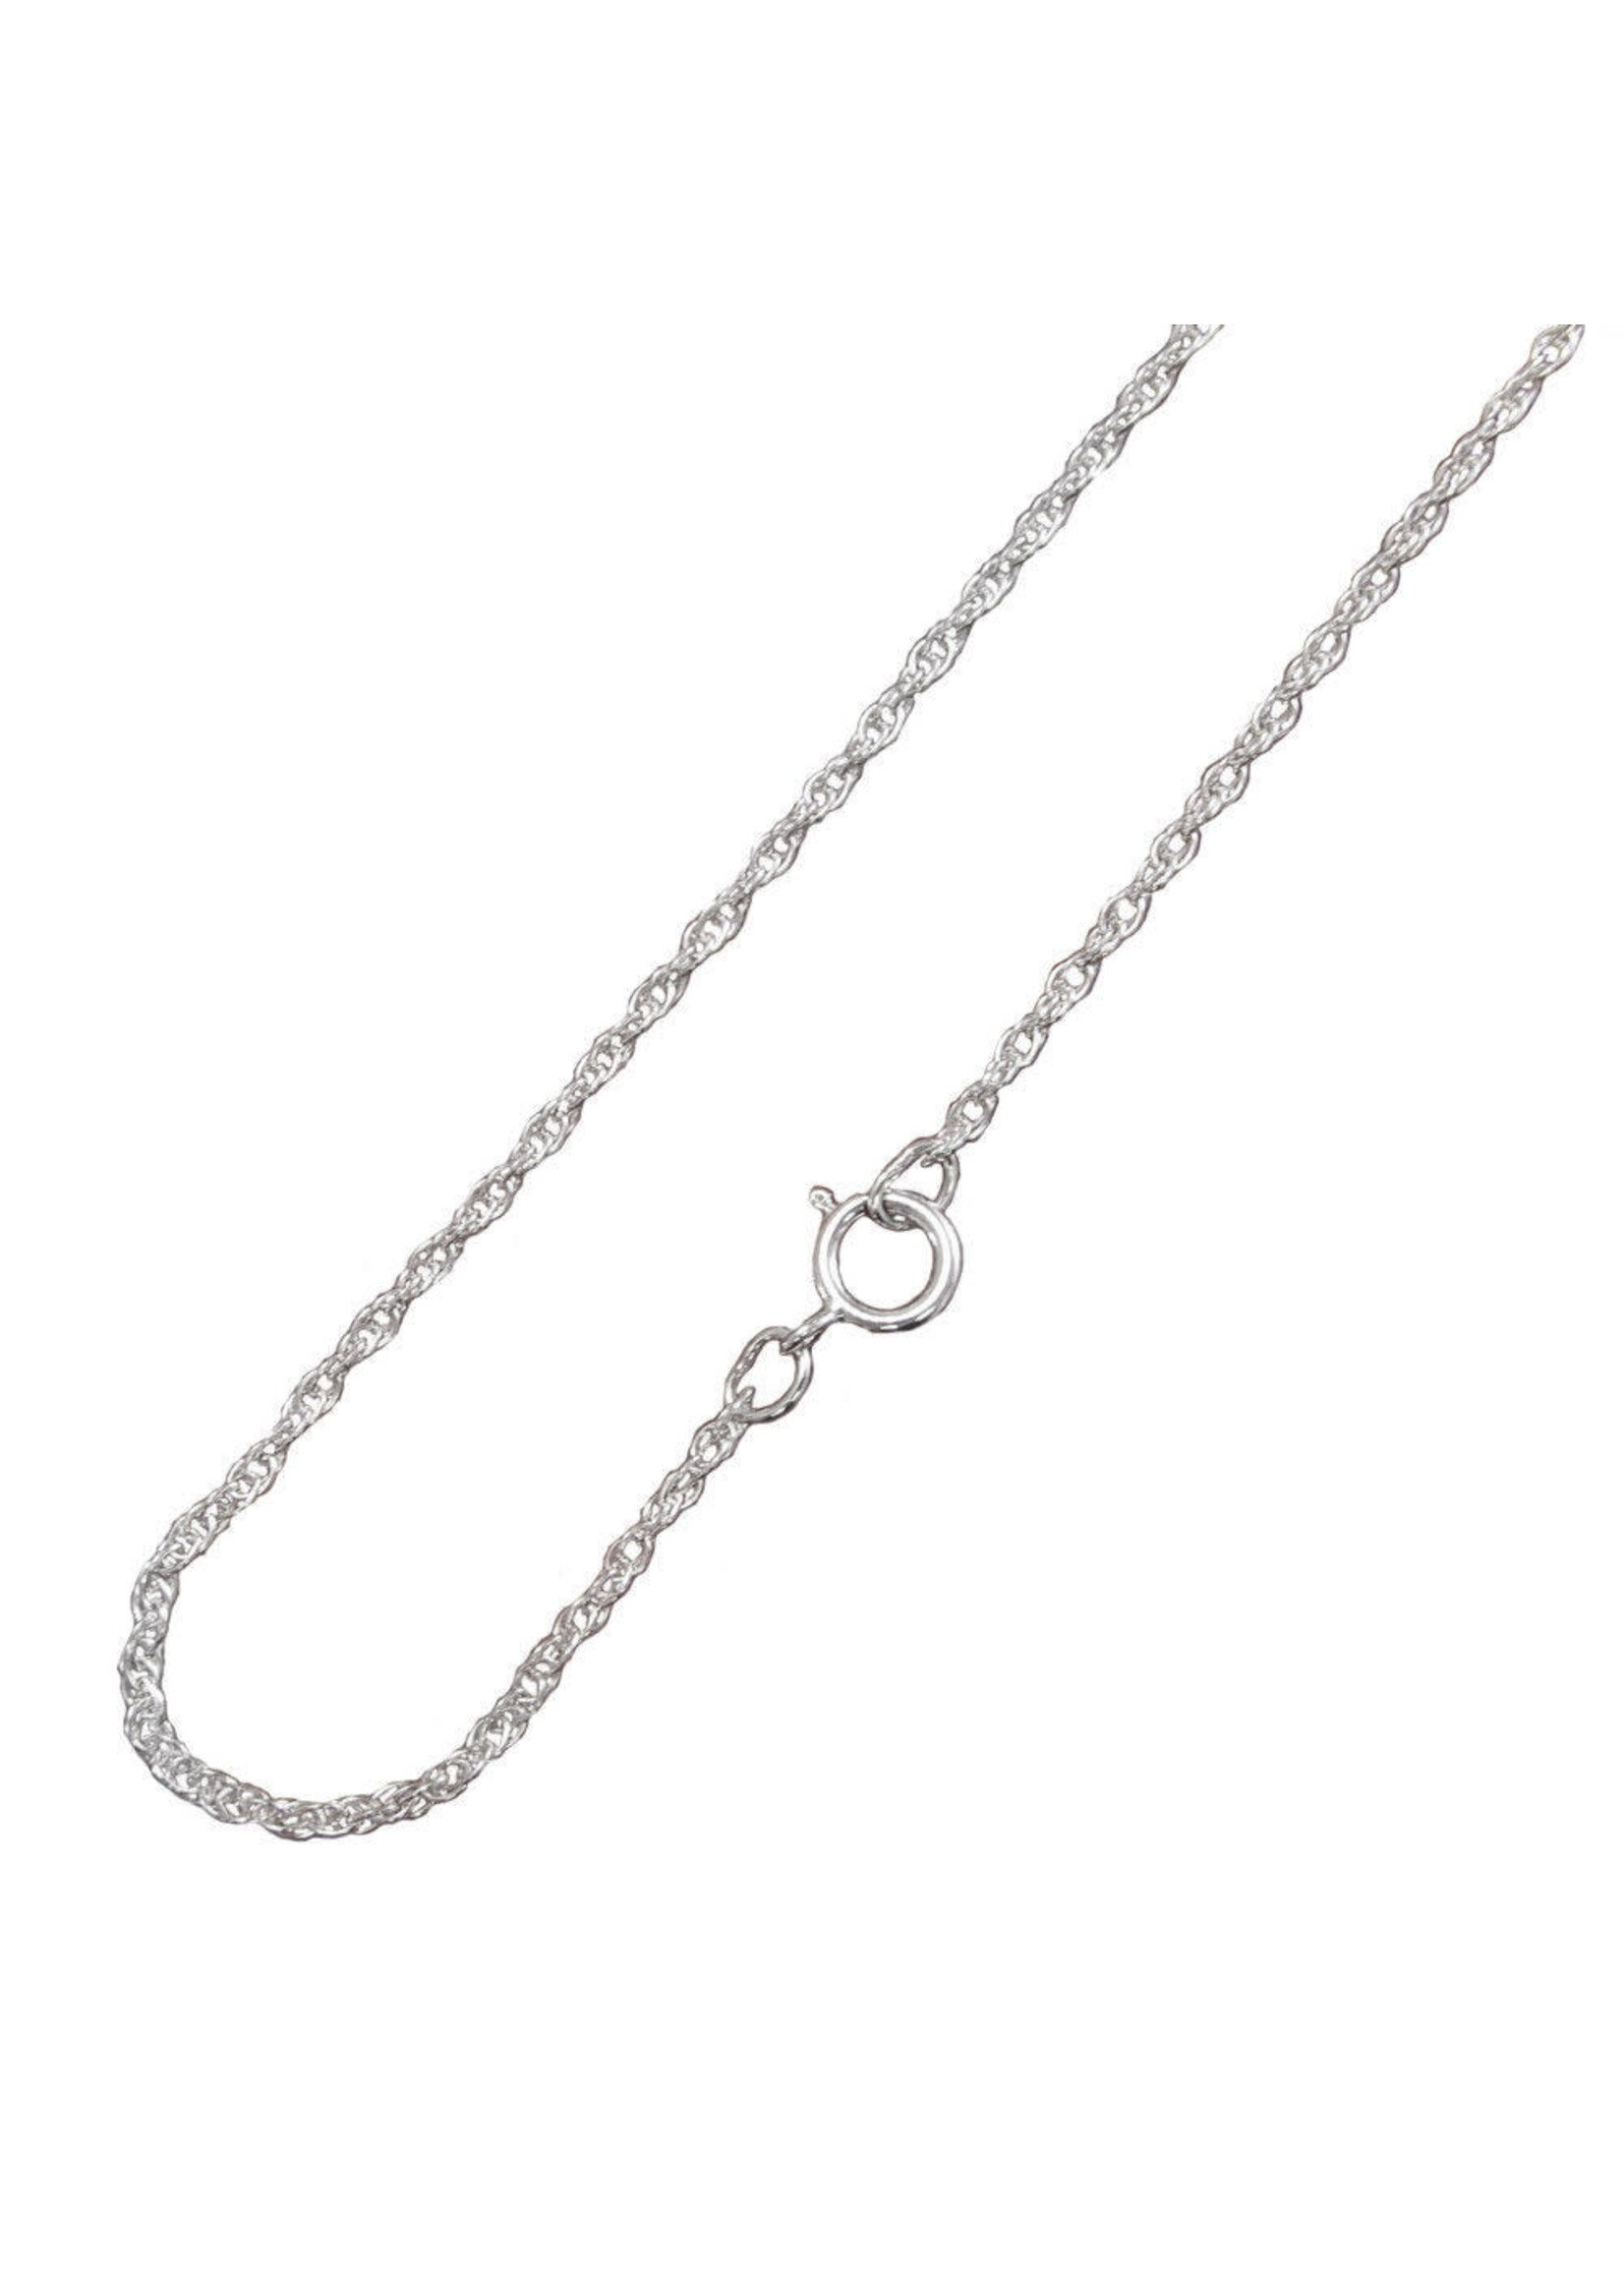 Sterling Silver Rope Chain, 16"